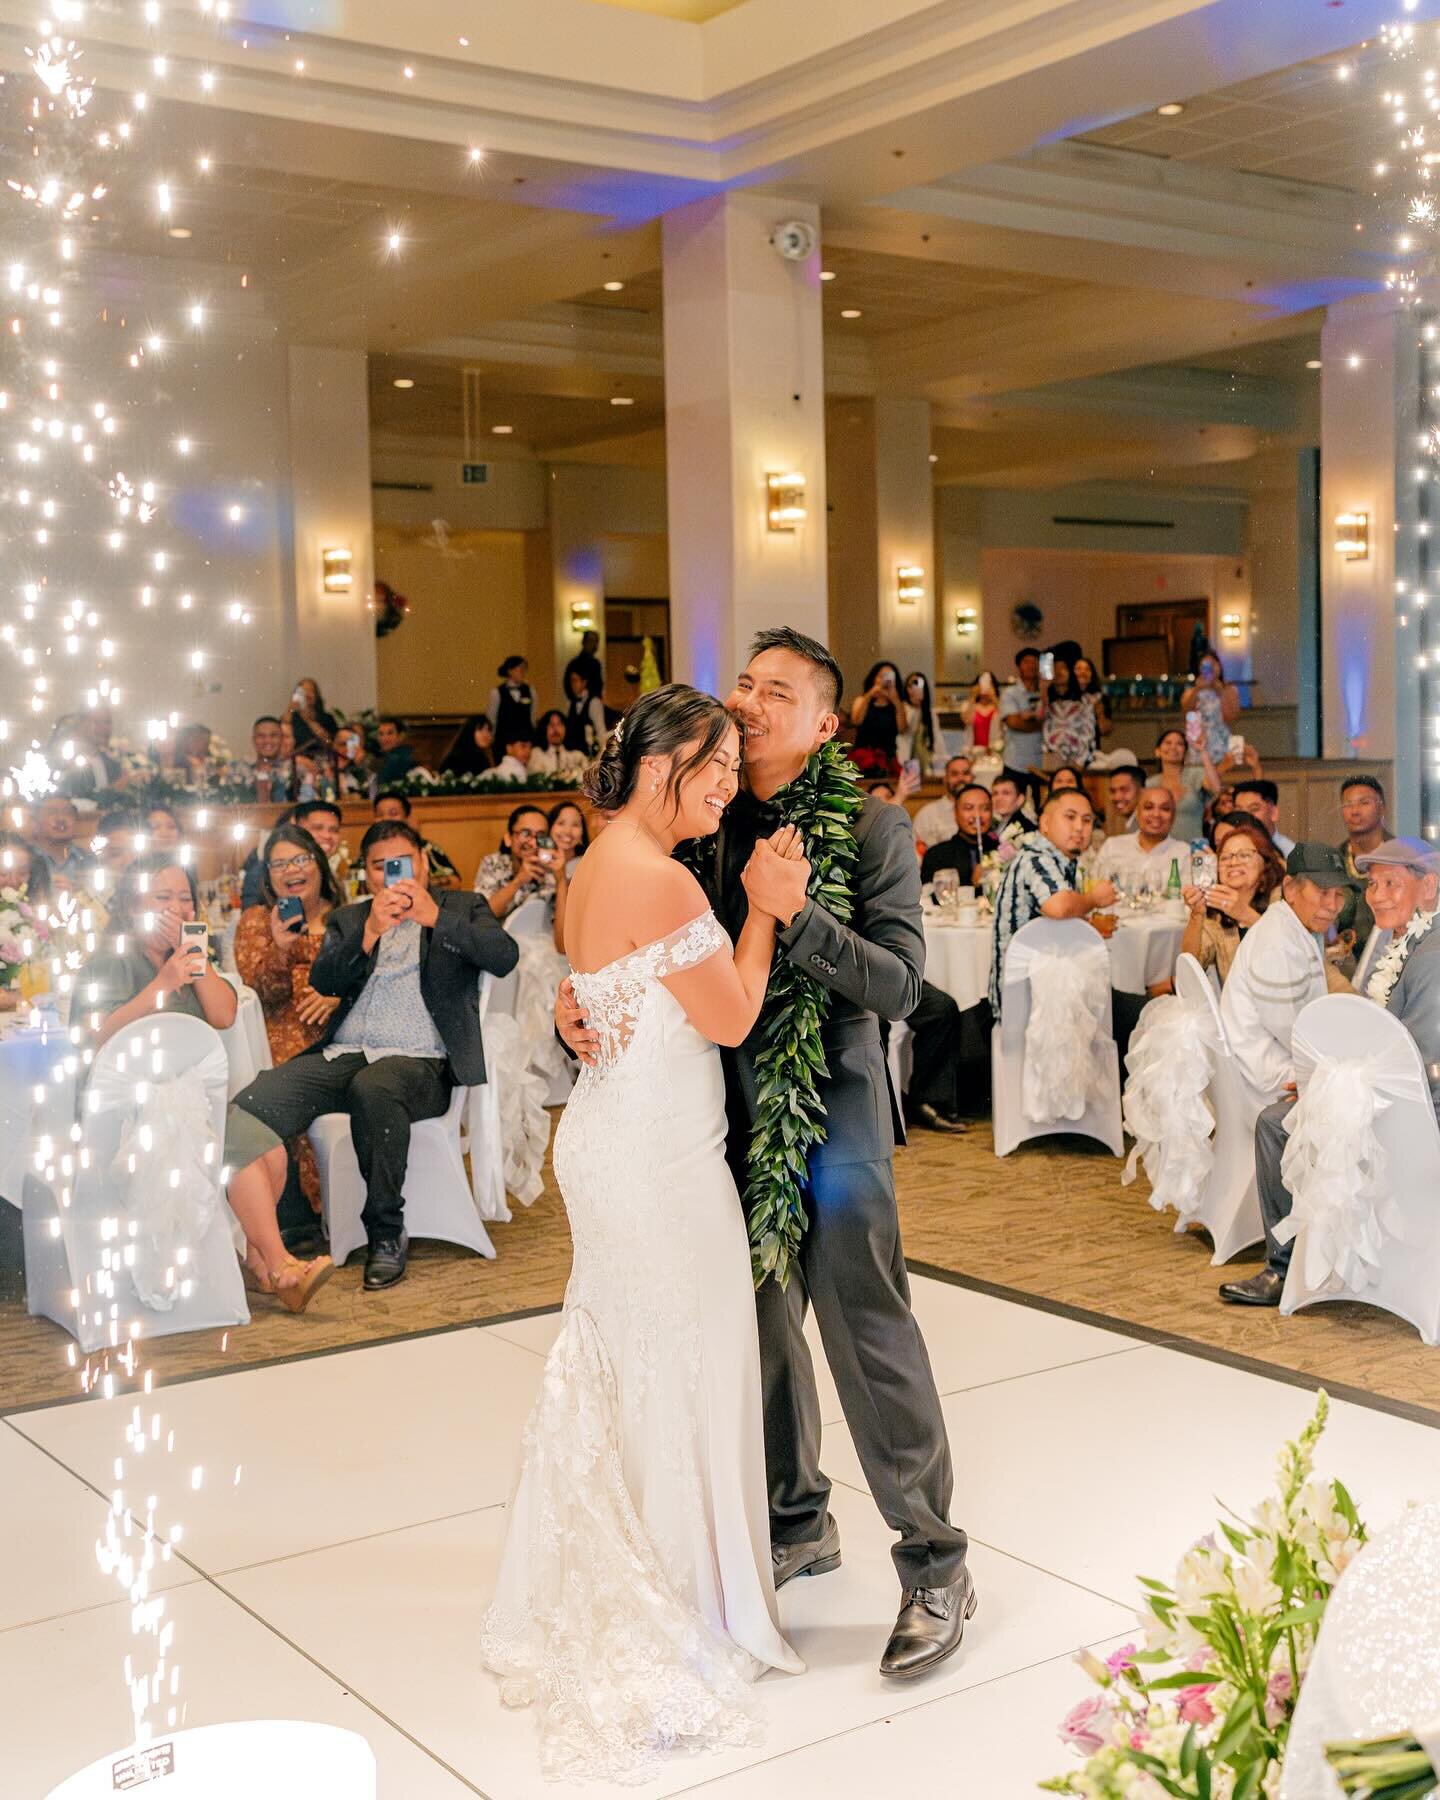 Thinking of what you can add to your First Dance to make it unique and memorable? Add some Cold Sparks, this definitely bring lots of excitement with your guests and is great for photos! 
⠀⠀⠀⠀⠀⠀⠀⠀⠀
Photo/Video: @newviewphotoandfilms
Emcee: @jonah_jax